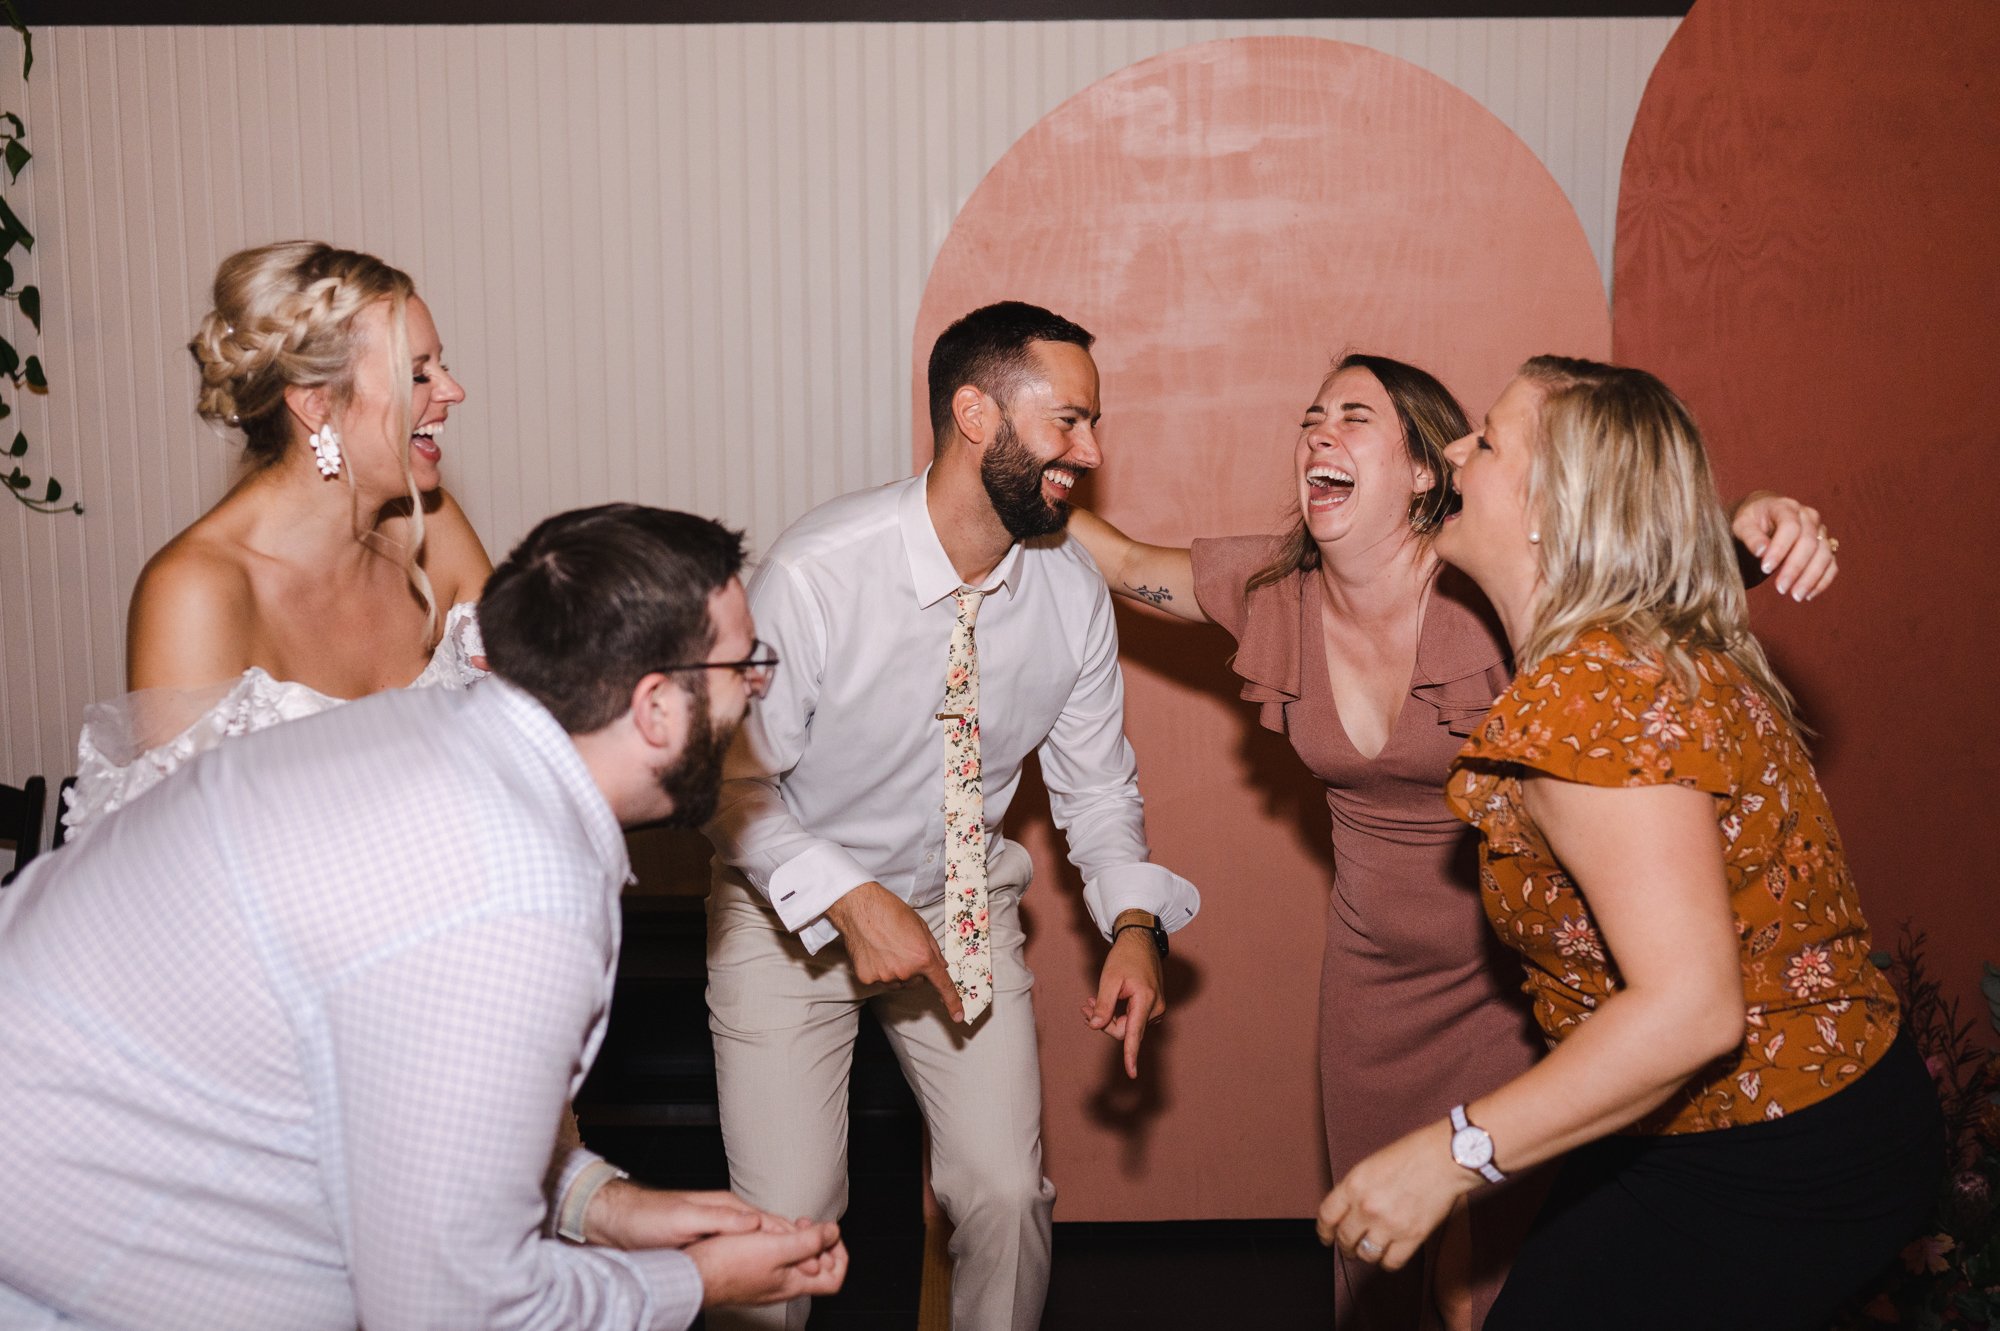 Candid of Groom and wedding guests dancing